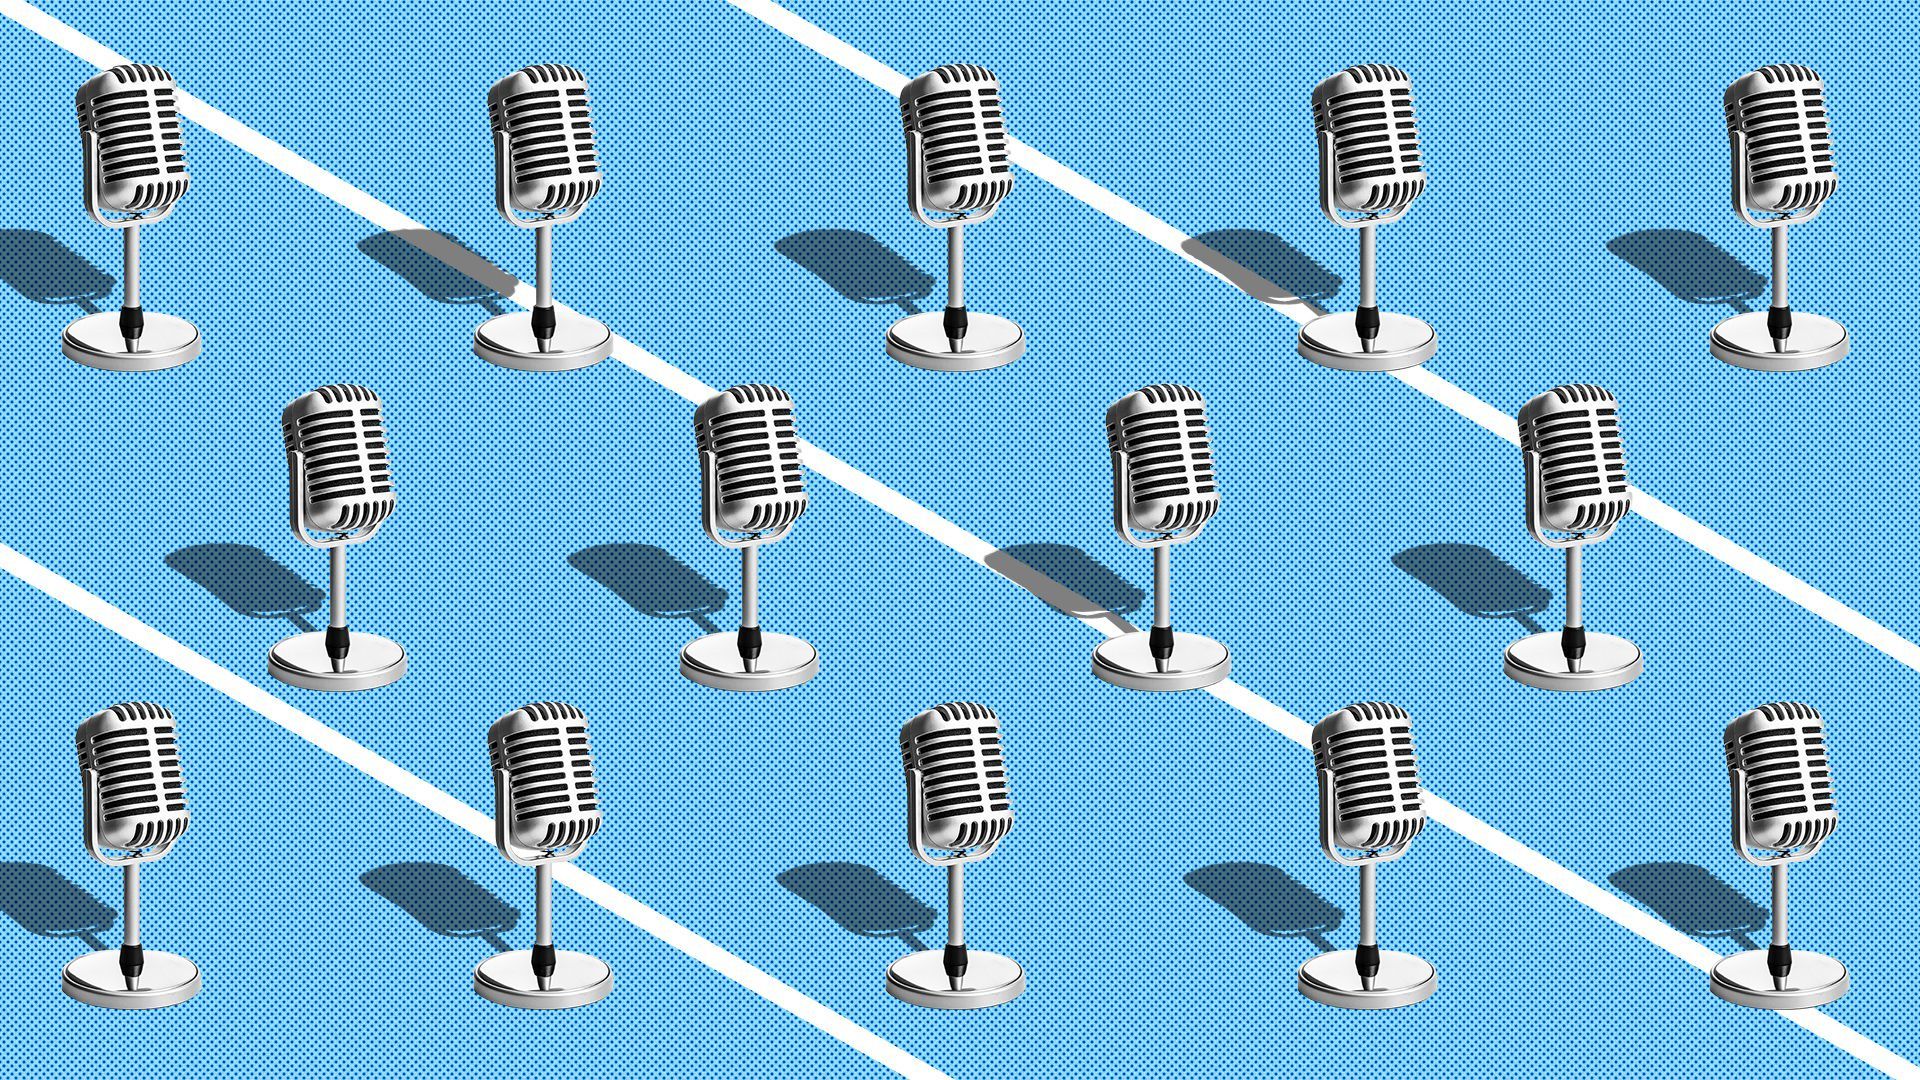 Illustration of a pattern of microphones